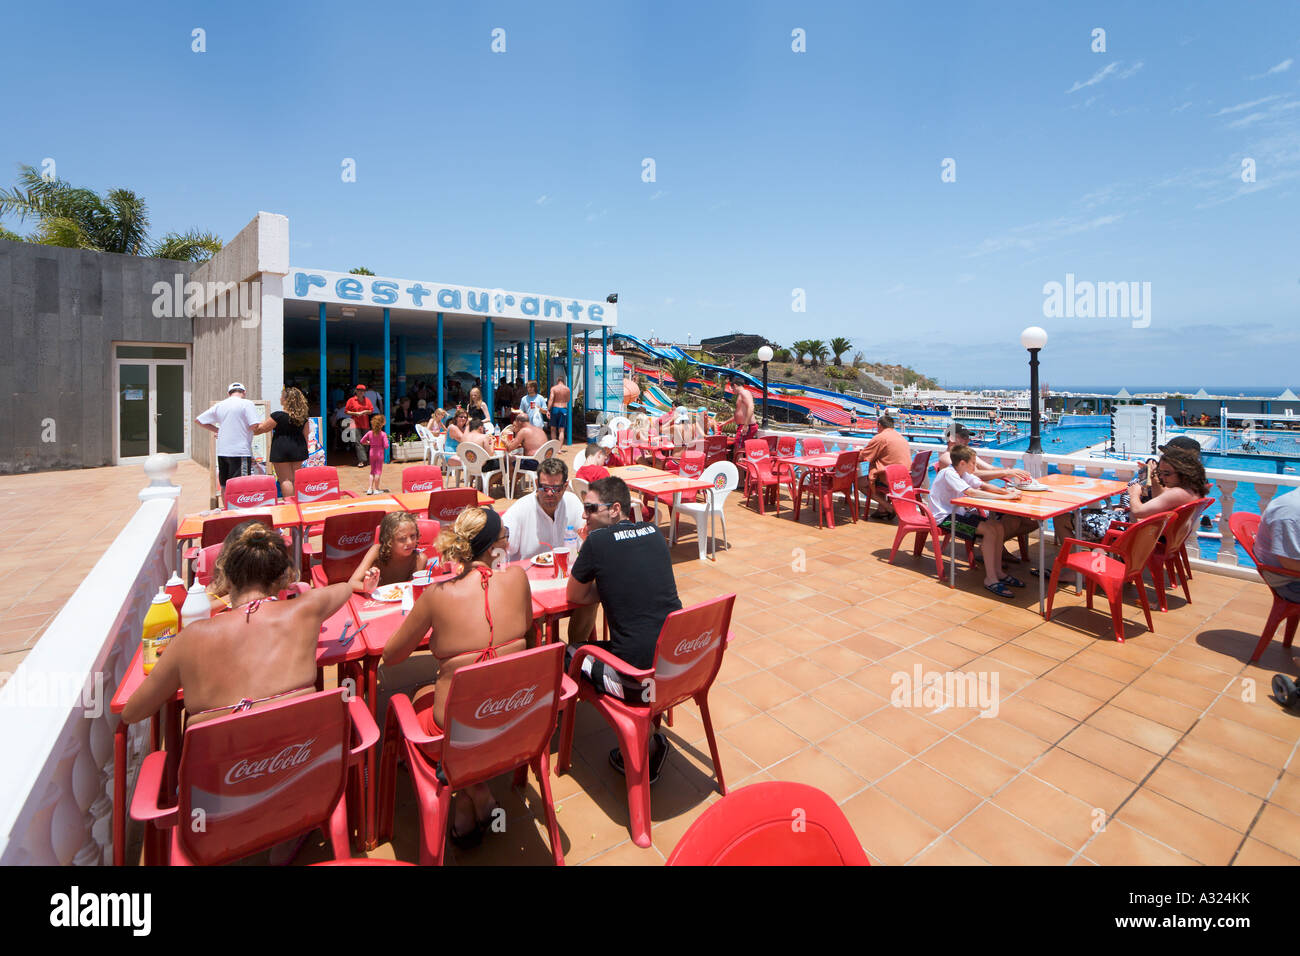 Restaurant at the Aquapark in Costa Teguise, Lanzarote, Canary Islands, Spain Stock Photo